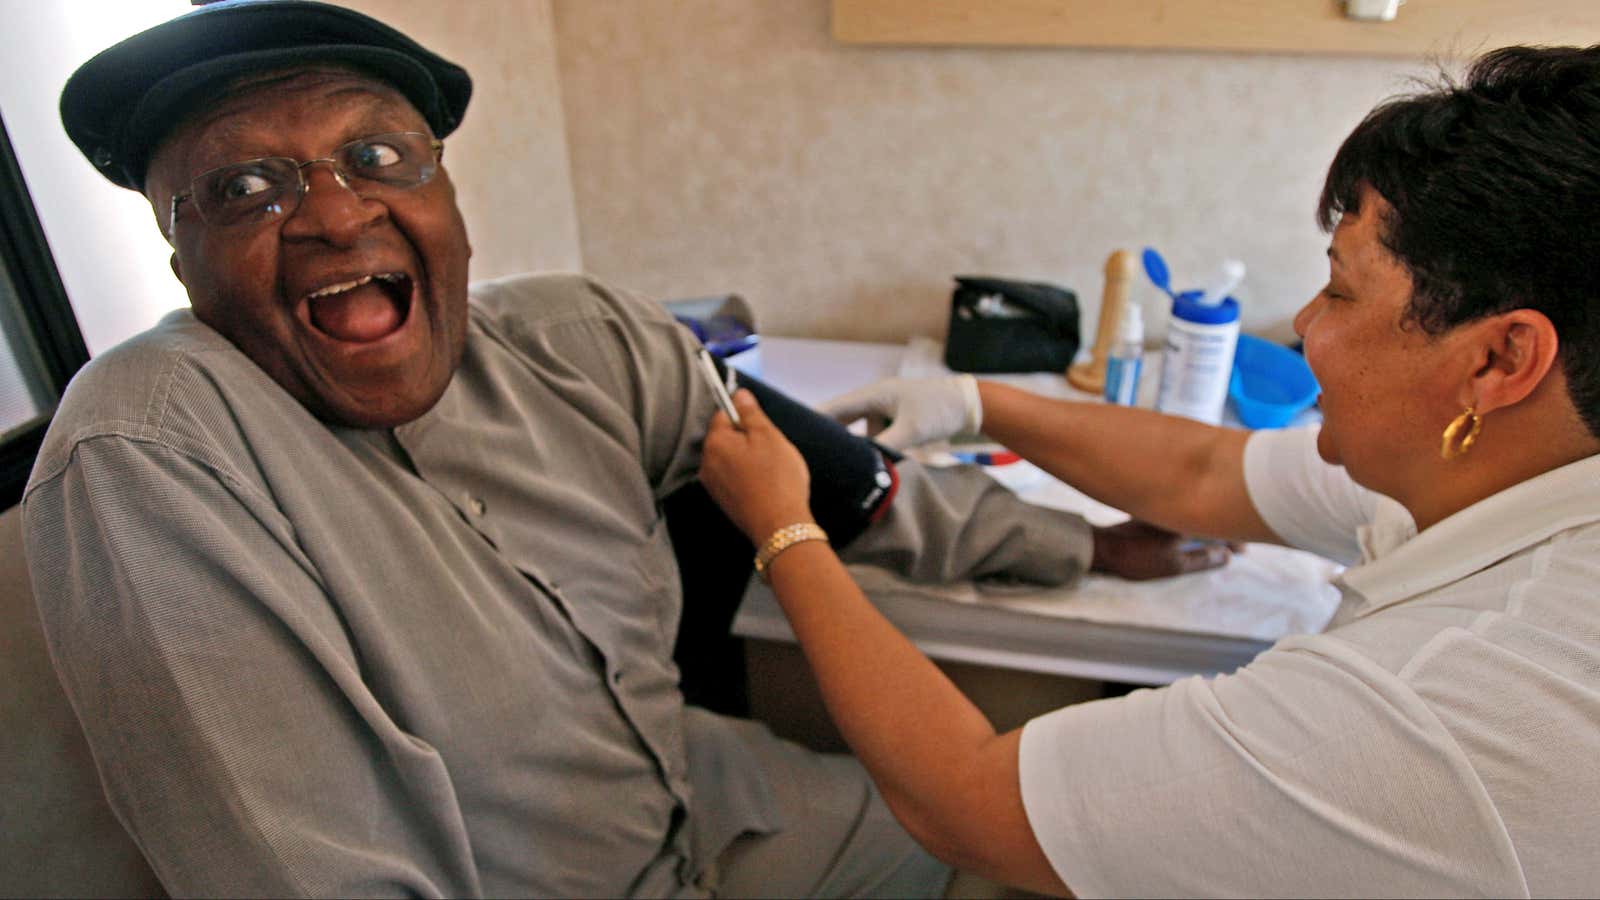 Archbishop Desmond Tutu helps to raise awareness about diabetes and other diseases inside a Tutu Tester mobile unit